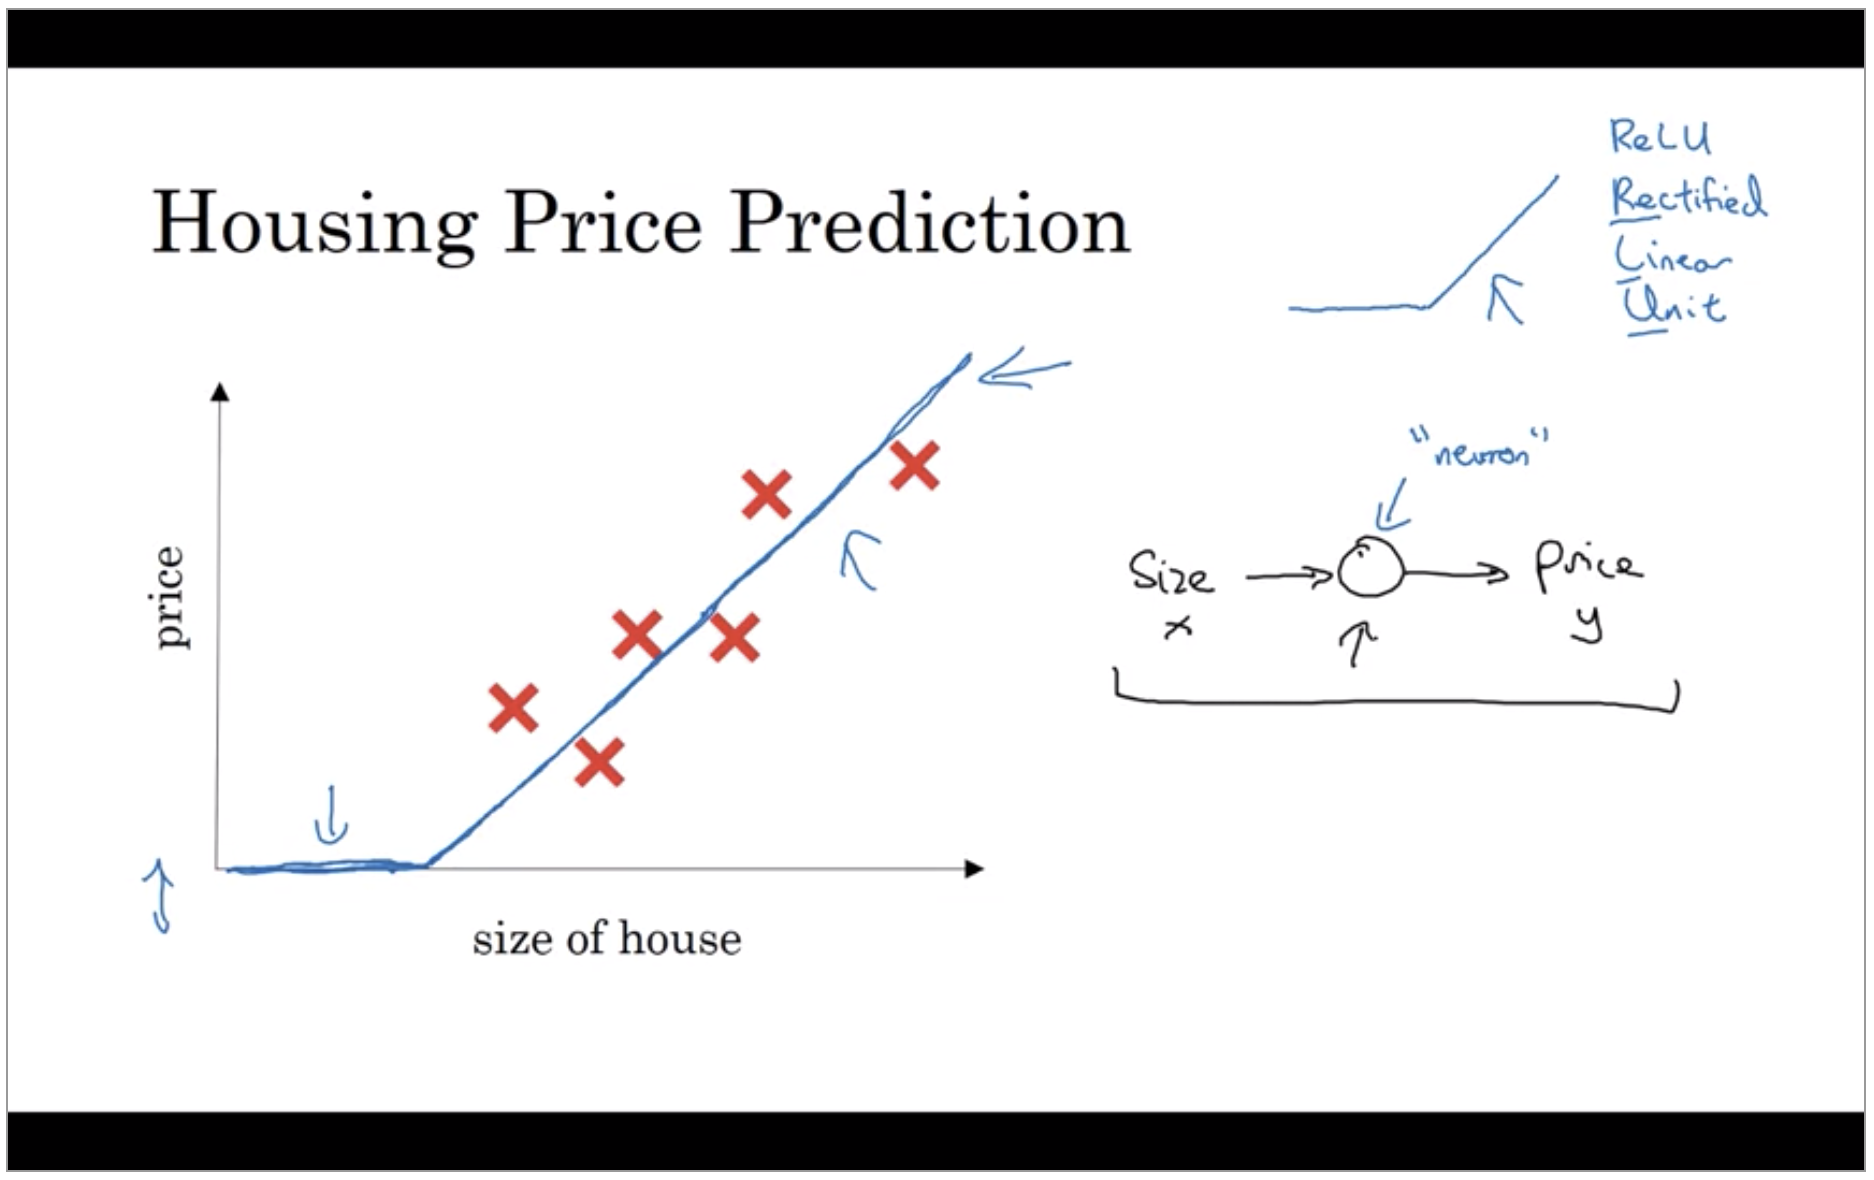 housing-price-prediction.png